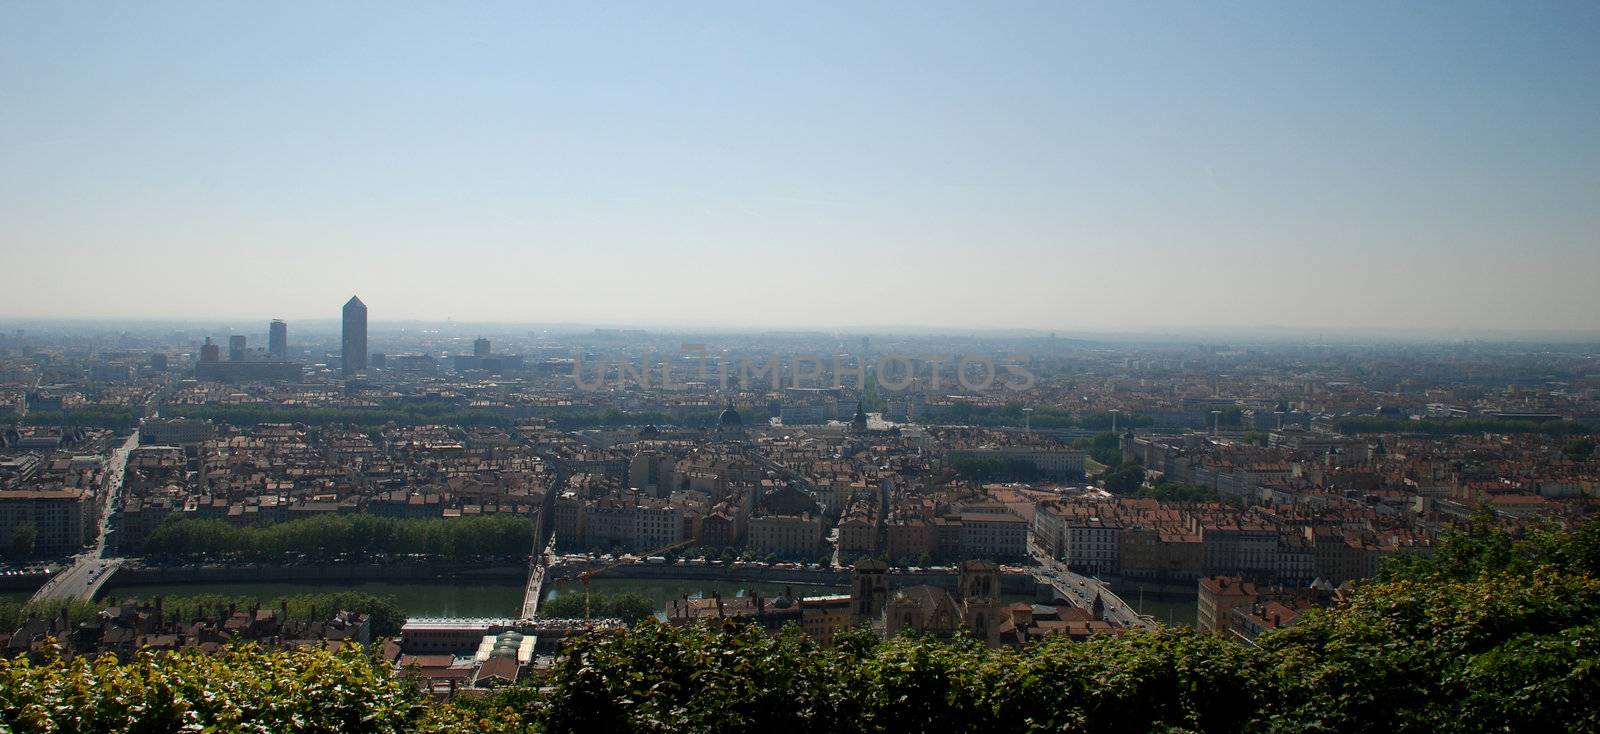 We can see a landscape of Lyon seen from the hill of the basilica fourvi�re, we see the rhone, many buildings and roads.